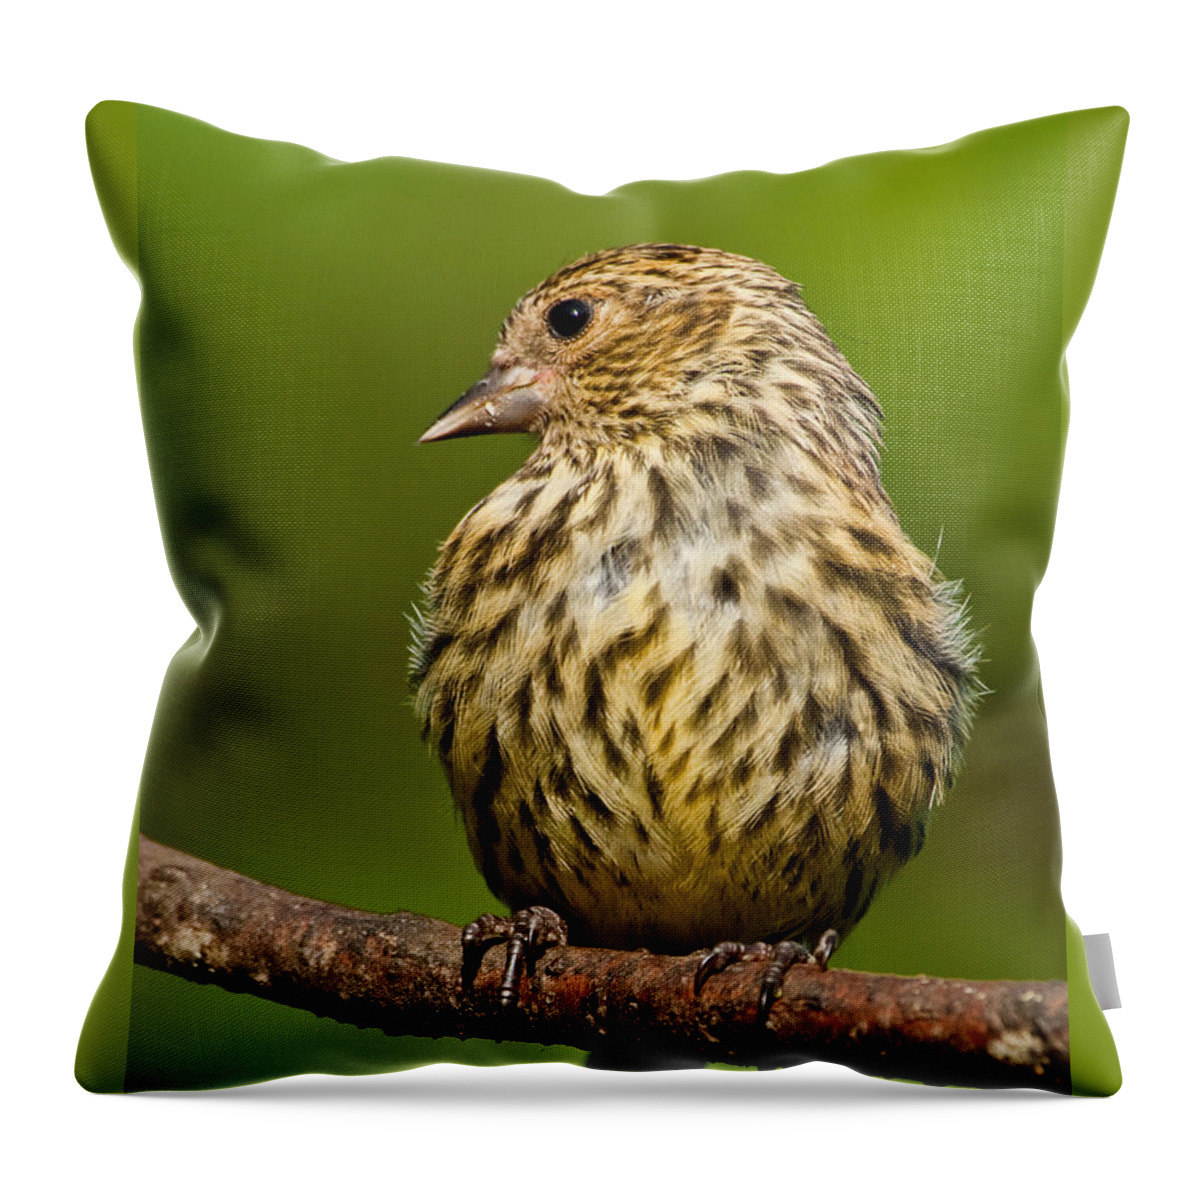 Animal Throw Pillow featuring the photograph Pine Siskin With Yellow Coloration by Jeff Goulden